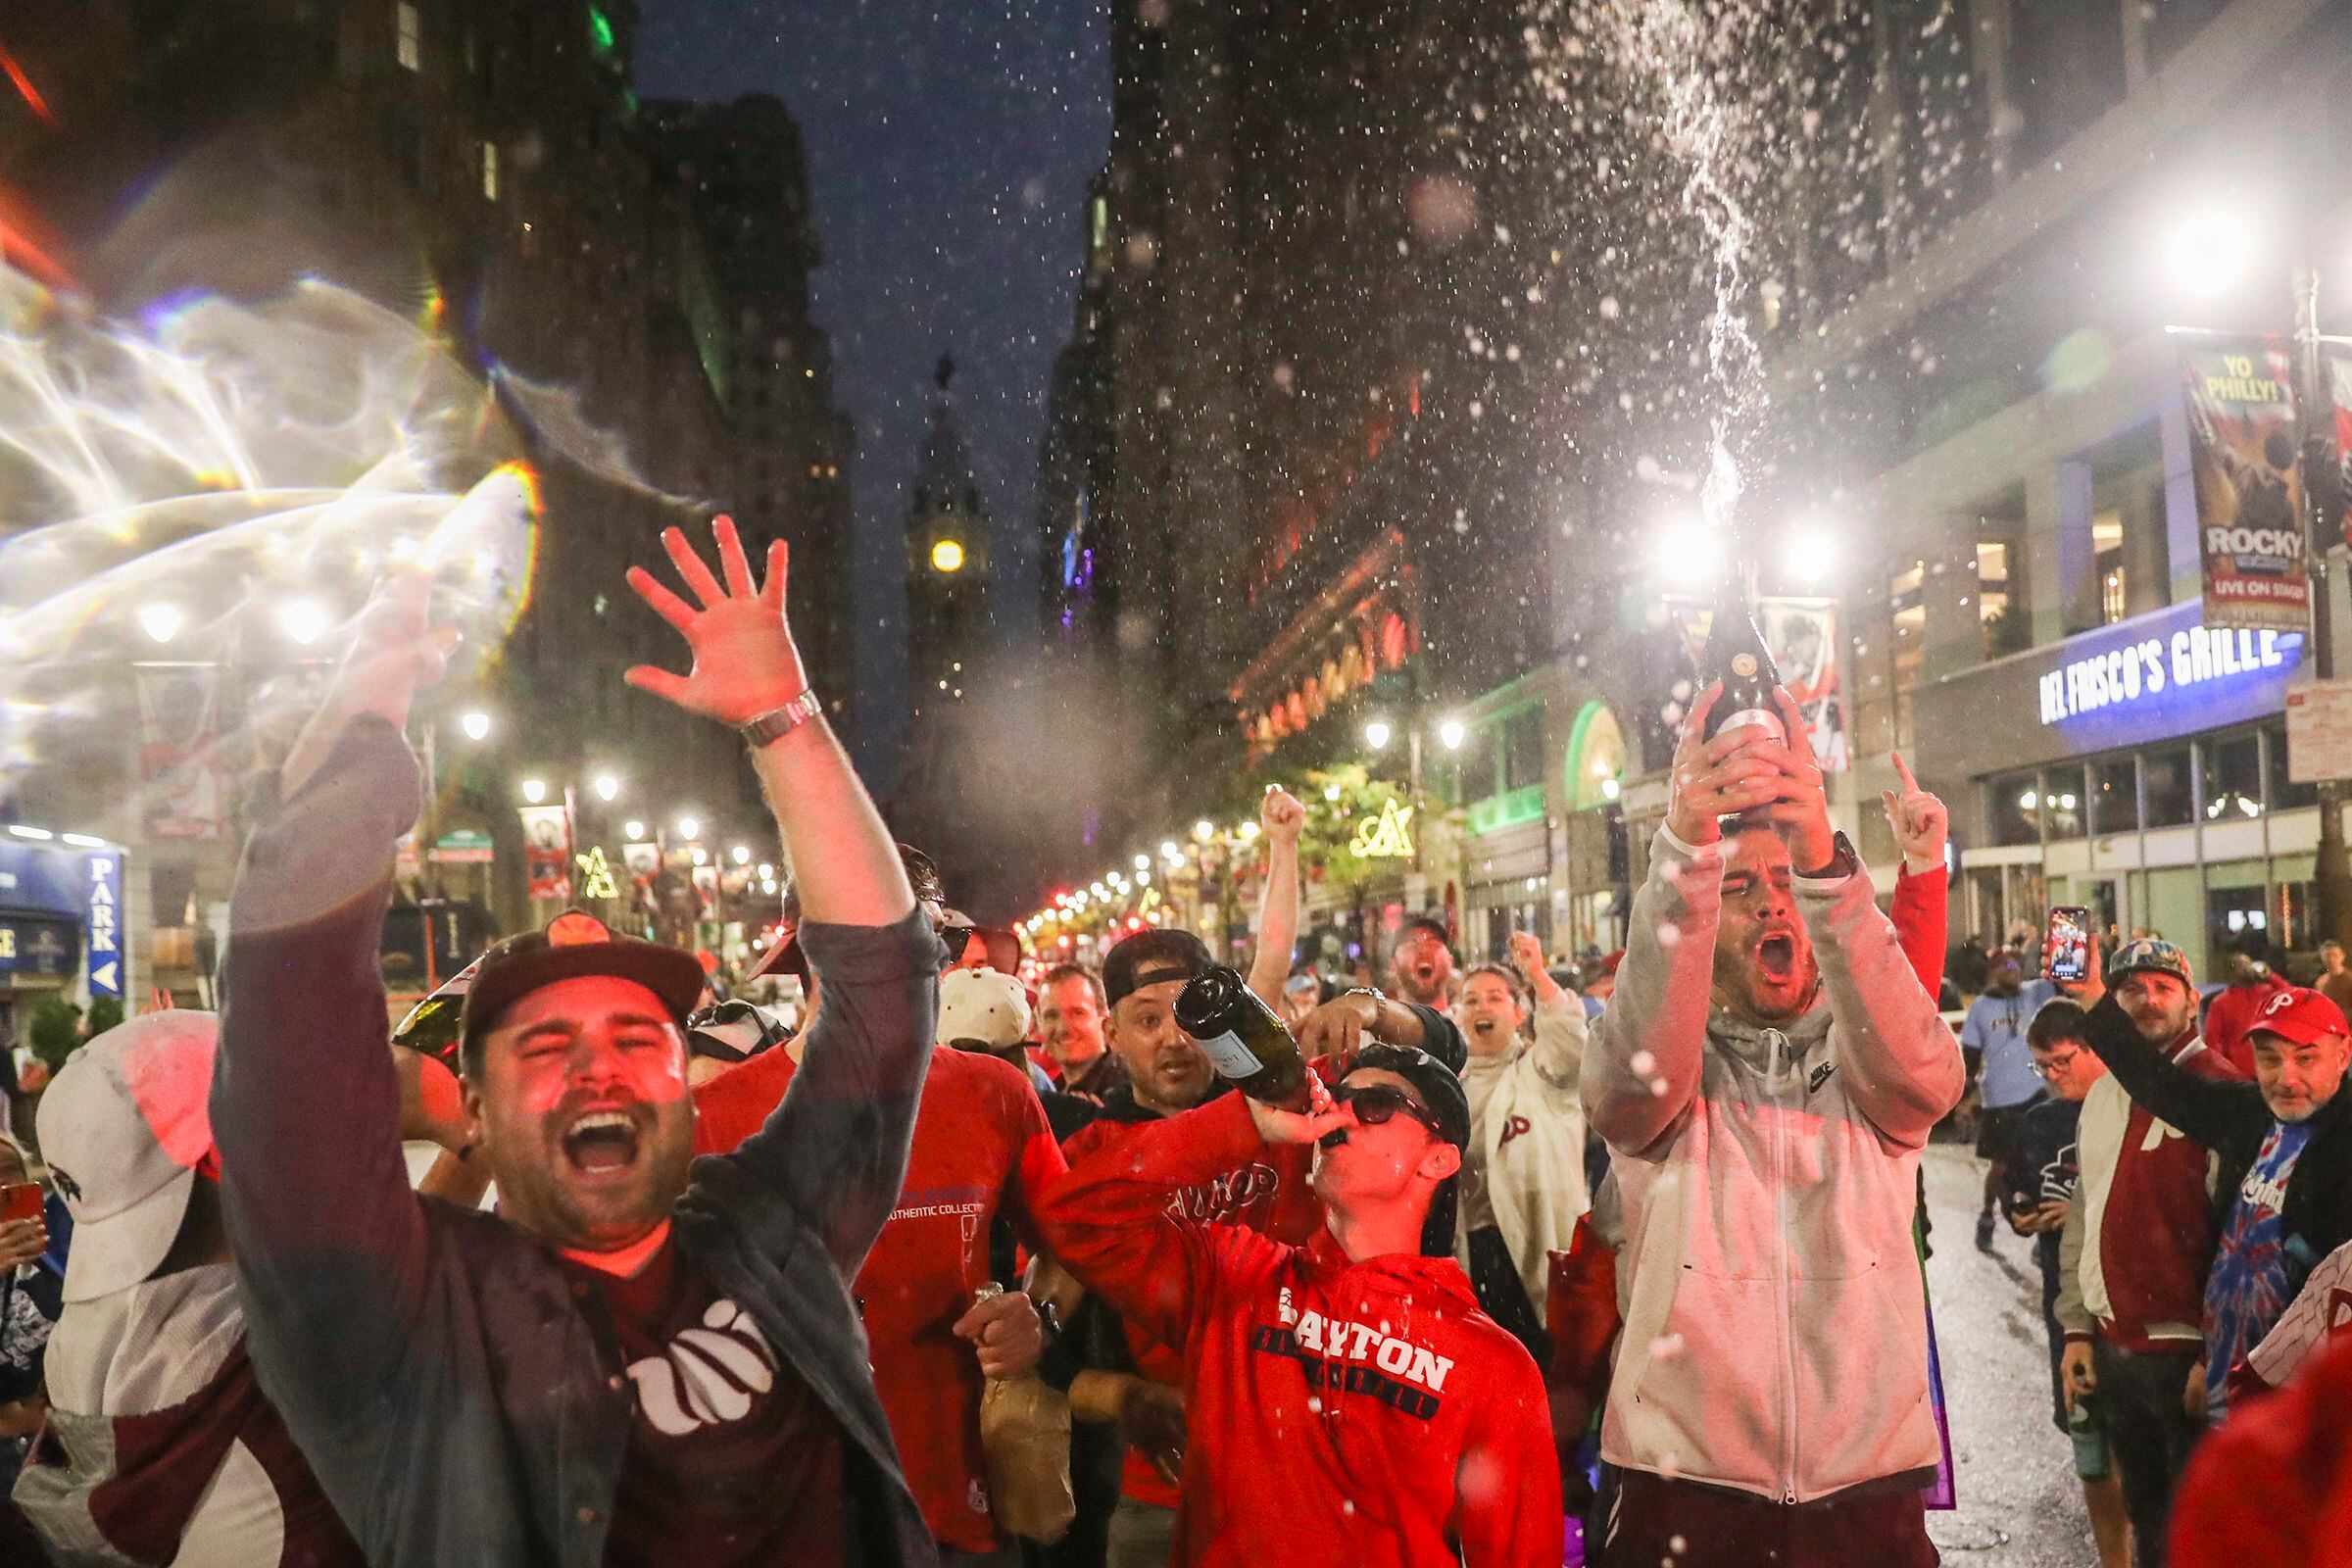 Philadelphia preps for partying should Phillies clinch World